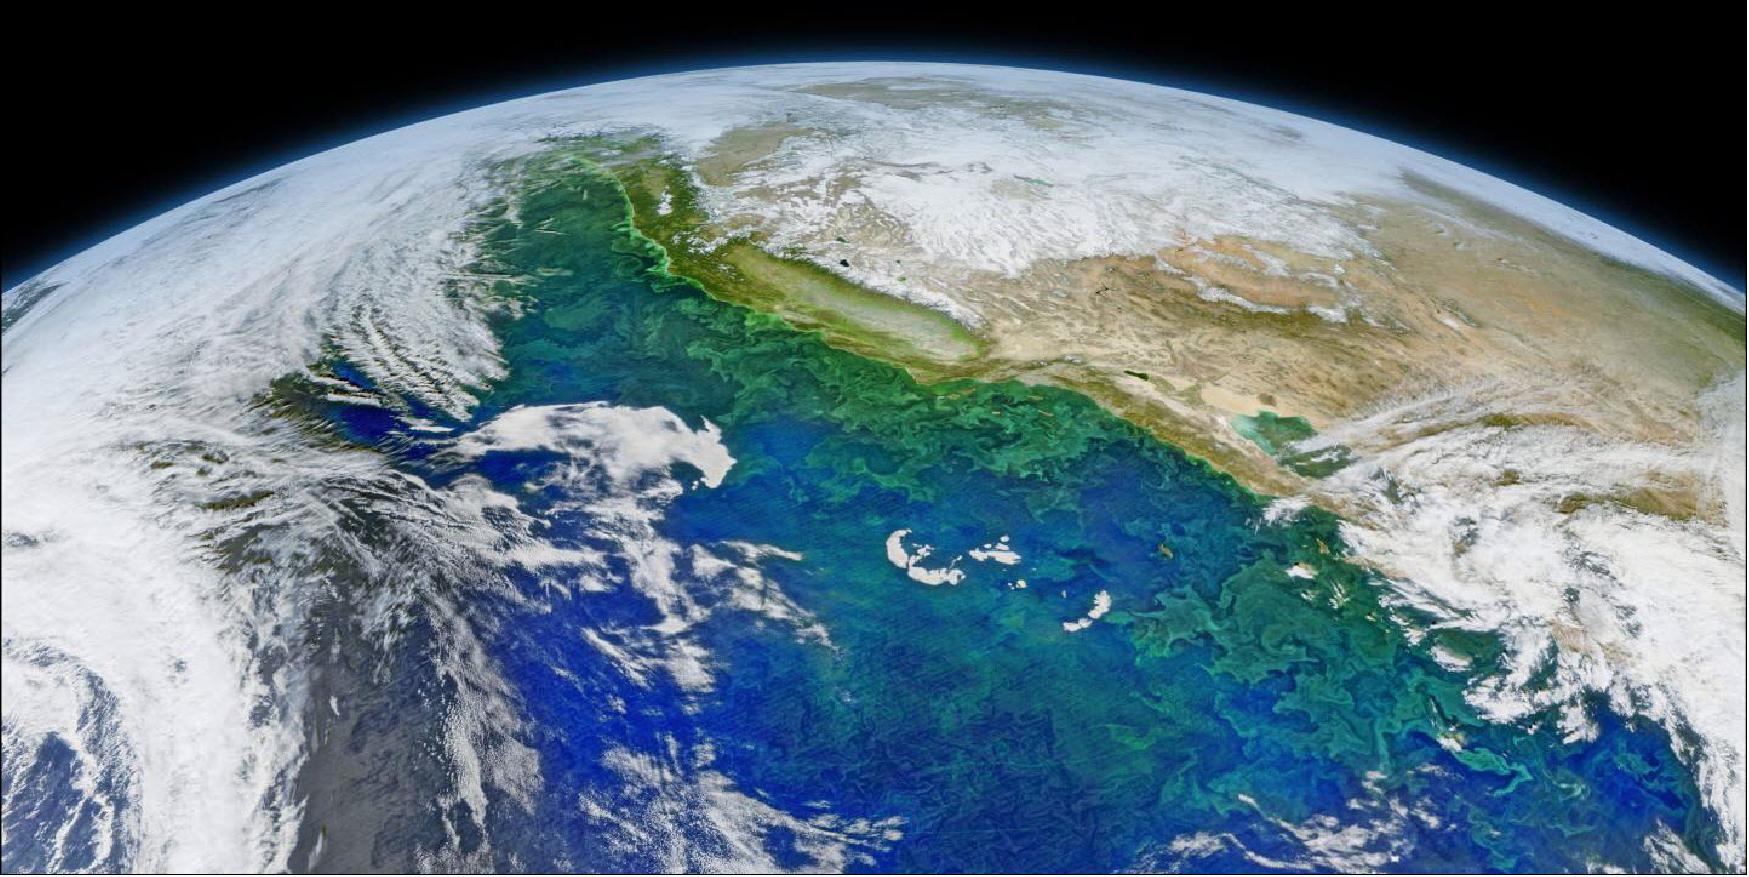 Figure 20: On 8 February 2016, the VIIRS on the Suomi NPP satellite captured several images of blooming phytoplankton and swirling currents along the coast of California and western Mexico. The images were stitched together into a composite built with data from the red, green, and blue wavelength bands on VIIRS, along with chlorophyll data. A series of image-processing steps highlighted the color differences and subtle features in the water (image credit: CU Boulder)